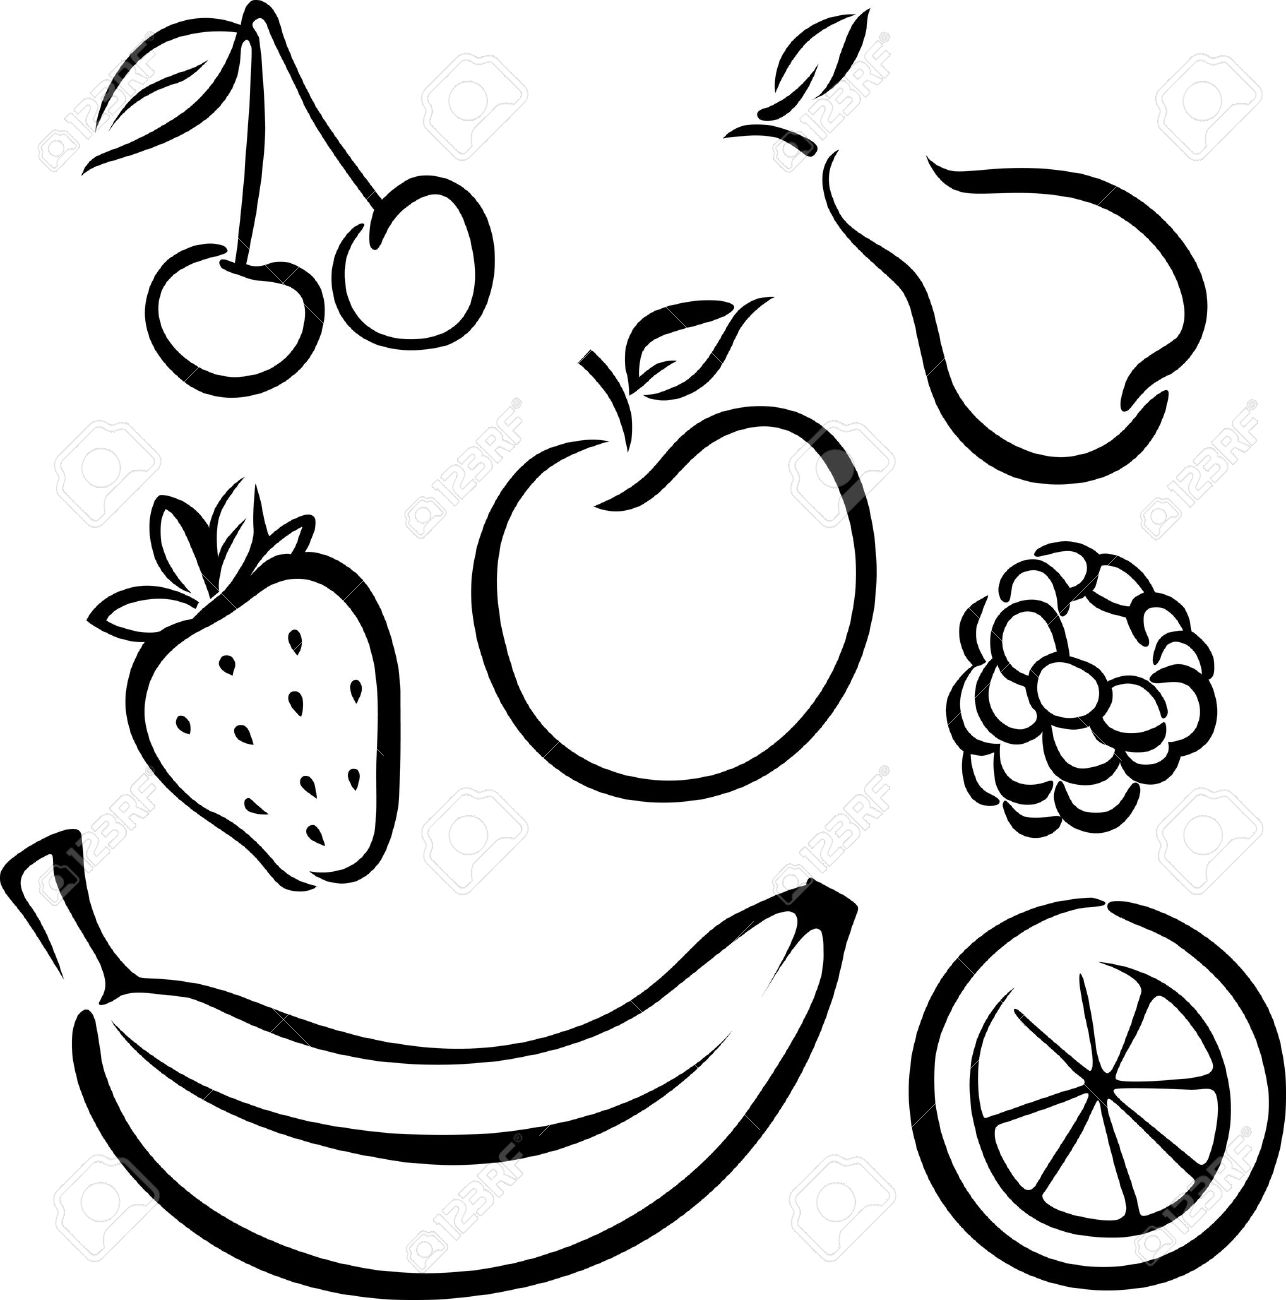 free fruit clipart black and white - photo #19